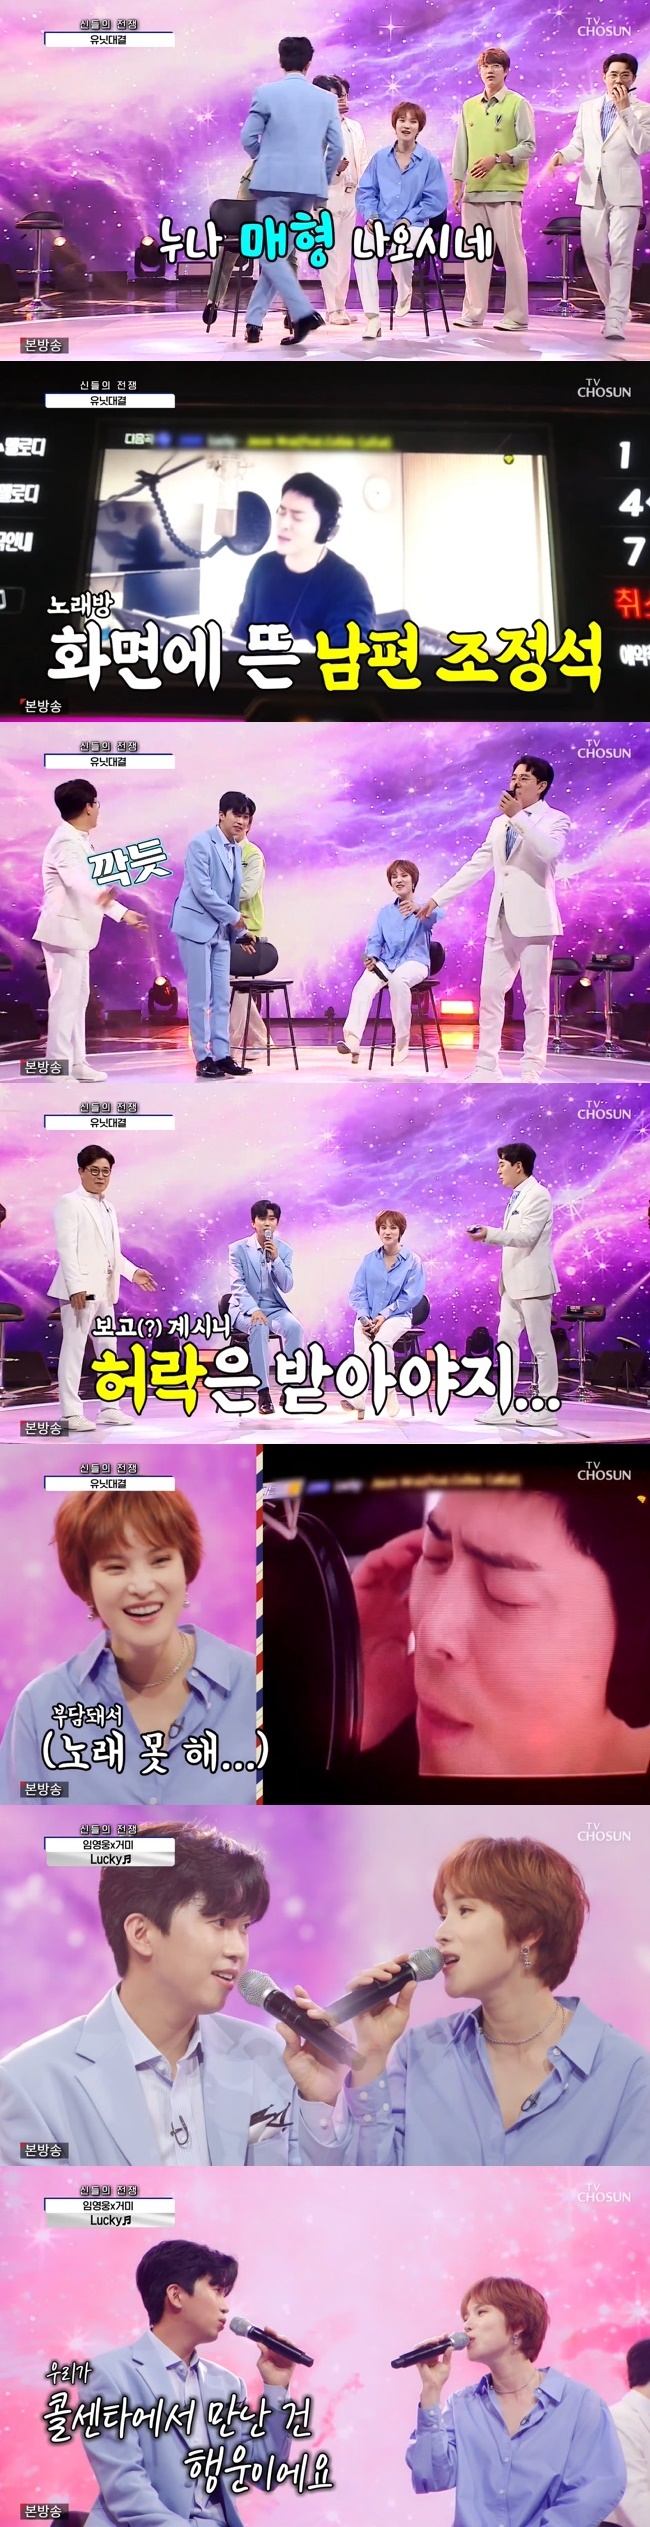 Spider panicked at the unexpected appearance of husband Jo Jung-sukOn July 1, the TV Chosun I Call for the Application Song - Love Colcenta released a duet stage between Spider and Lim Young-woong.Spider, Lim Young-woong, Sung Si Kyung and Kim Hee Jae played unit confrontation with me as team representative.While Spider and Lim Young-woong were preparing for the stage, Young-tak found that Jo Jung-suks music video appeared in the karaoke screen, saying, It is a brother-in-law.Lim Young-woong greeted the screen with a sharp greeting.Is it a cheering or something? Kim said. Is it a foul play?Lim Young-woong looked at the screen and asked for his understanding, saying, I will sit down for a while, and Spider was embarrassed to say, Please change the screen.